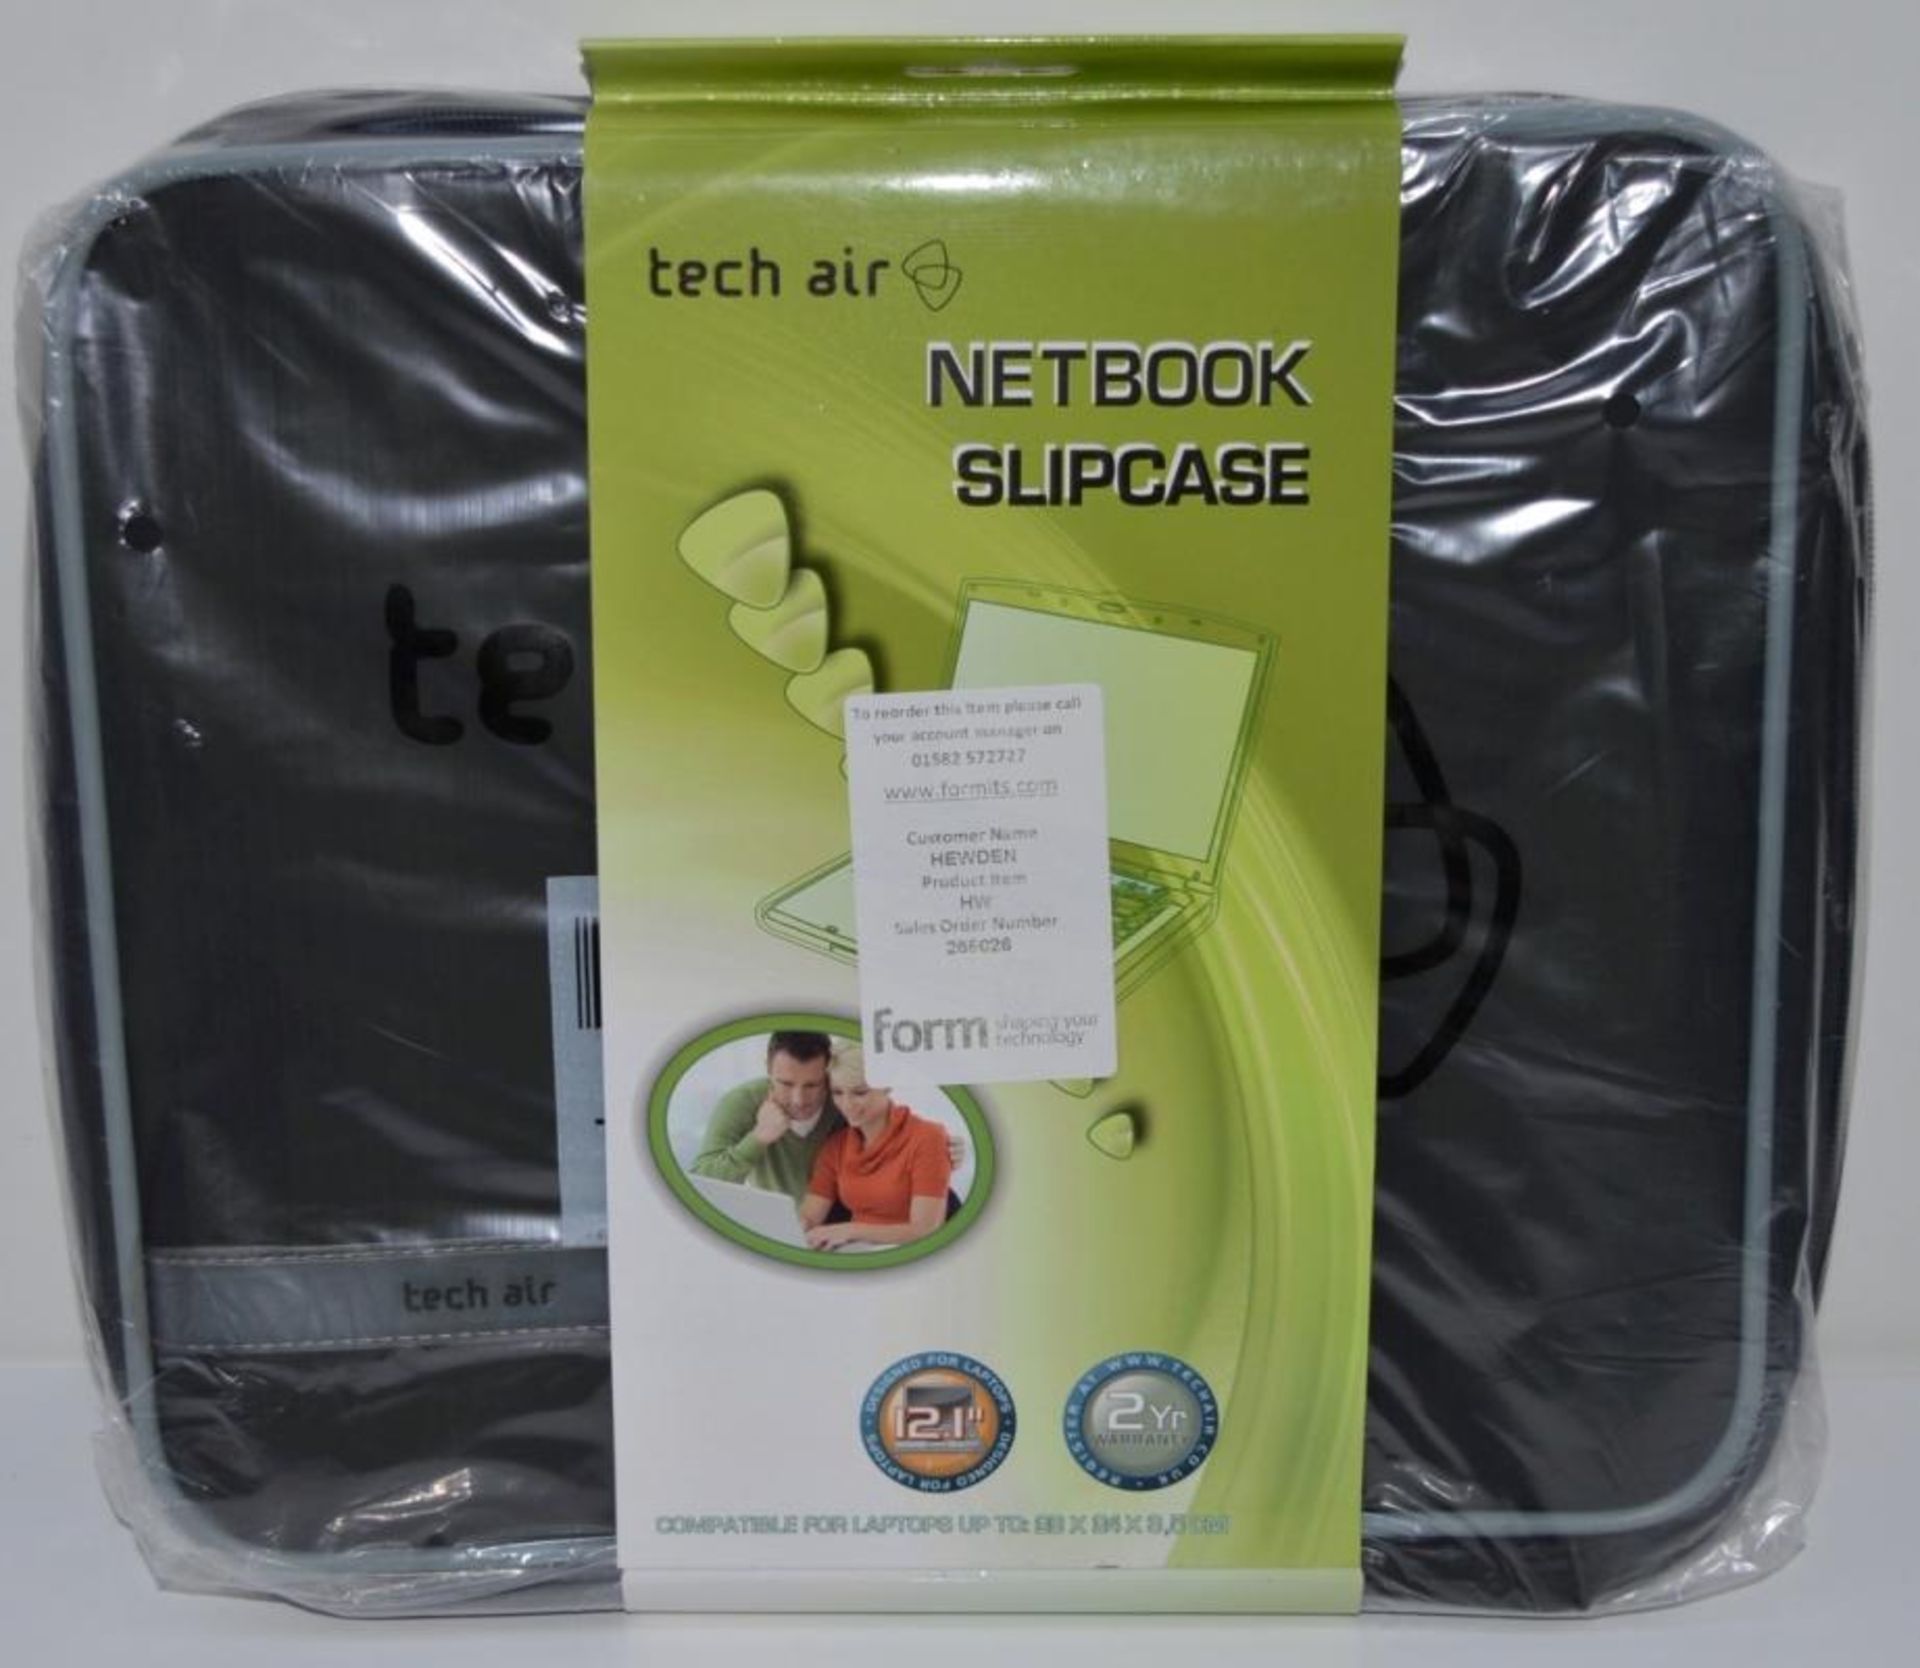 1 x Tech Air Netbook Slipcase - Suitable For Laptops upto 28 x 24 x 305cm - Brand New Stock - CL400